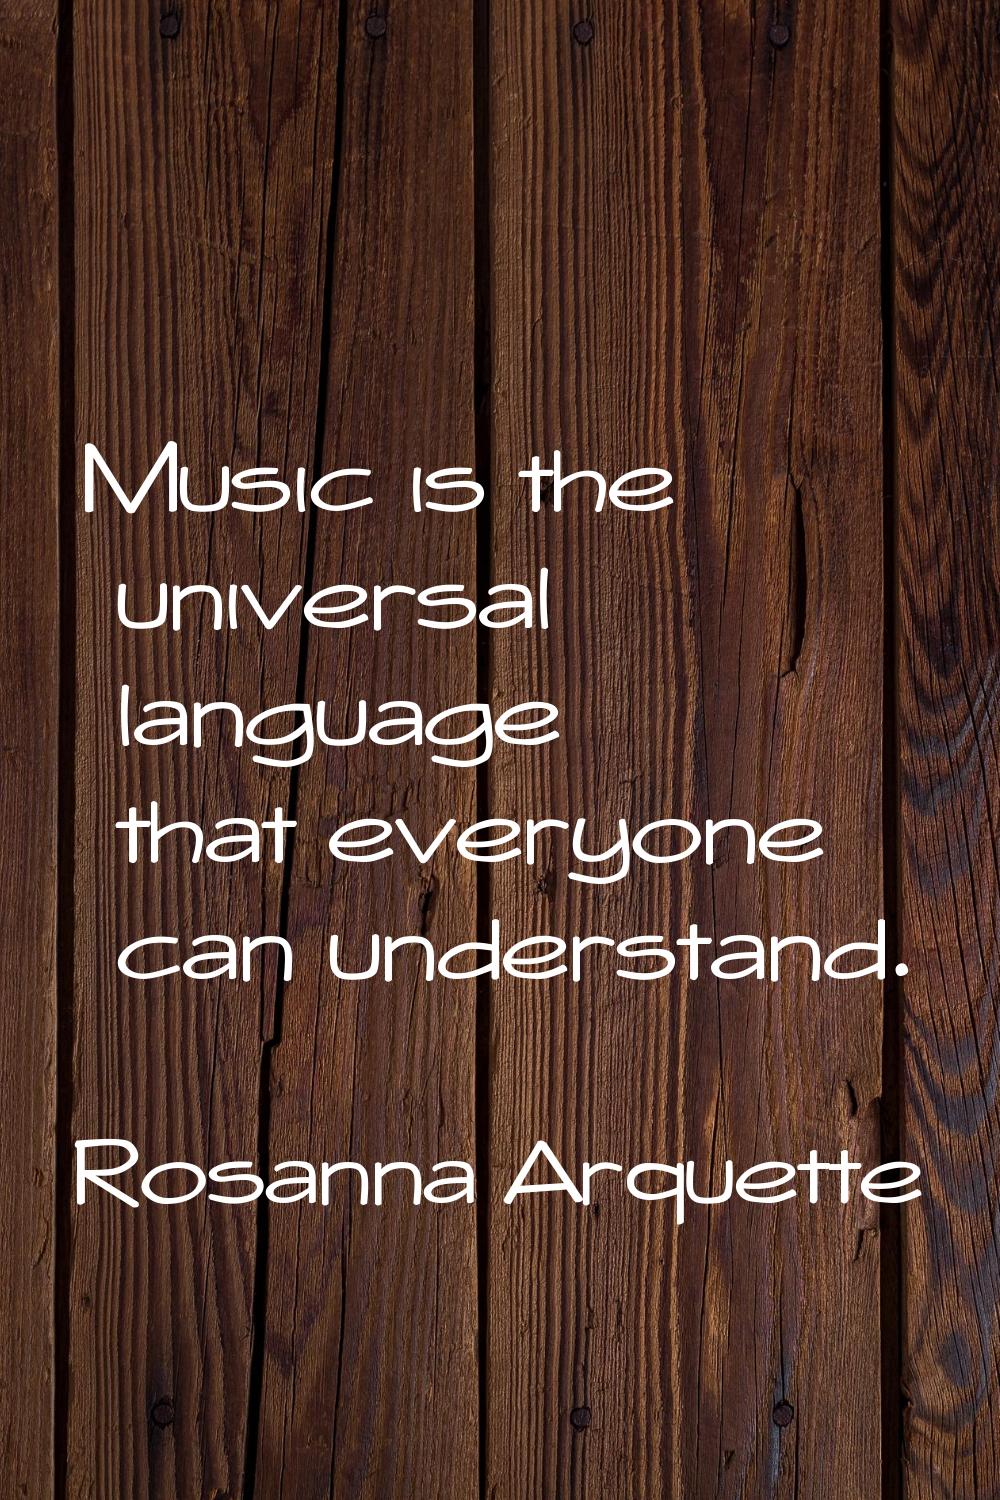 Music is the universal language that everyone can understand.